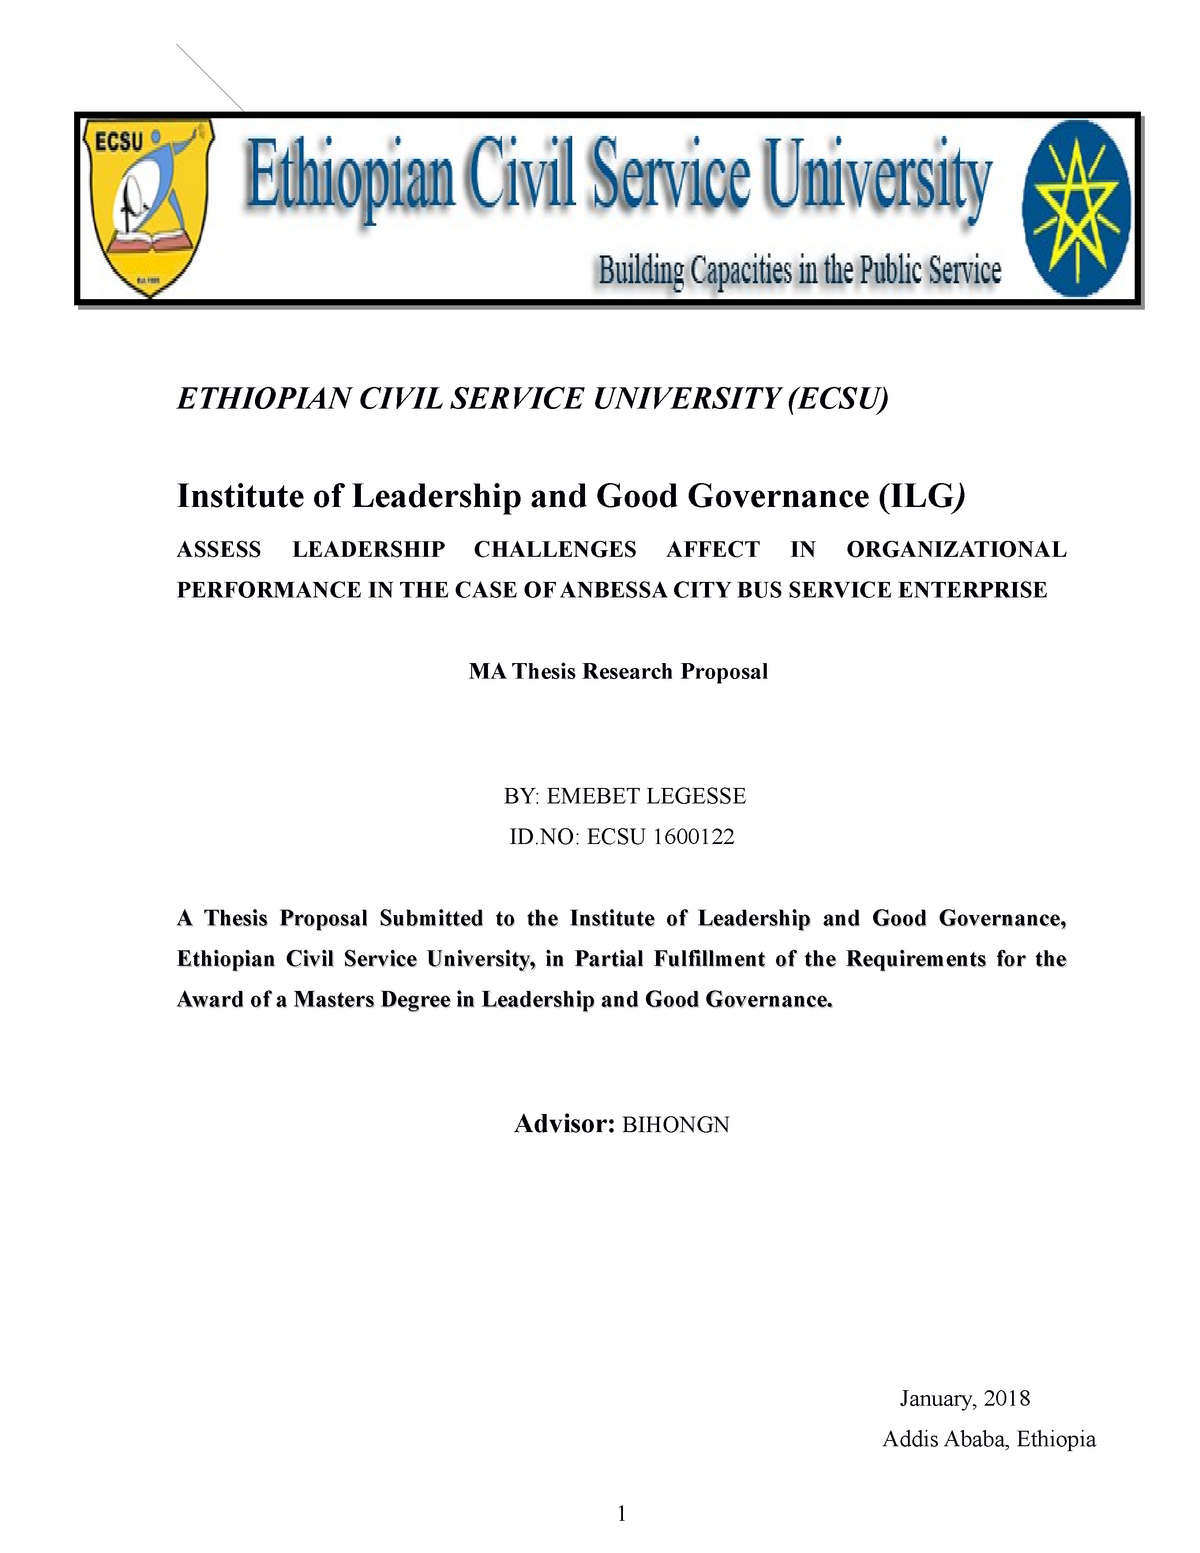 thesis for mba pdf in ethiopia